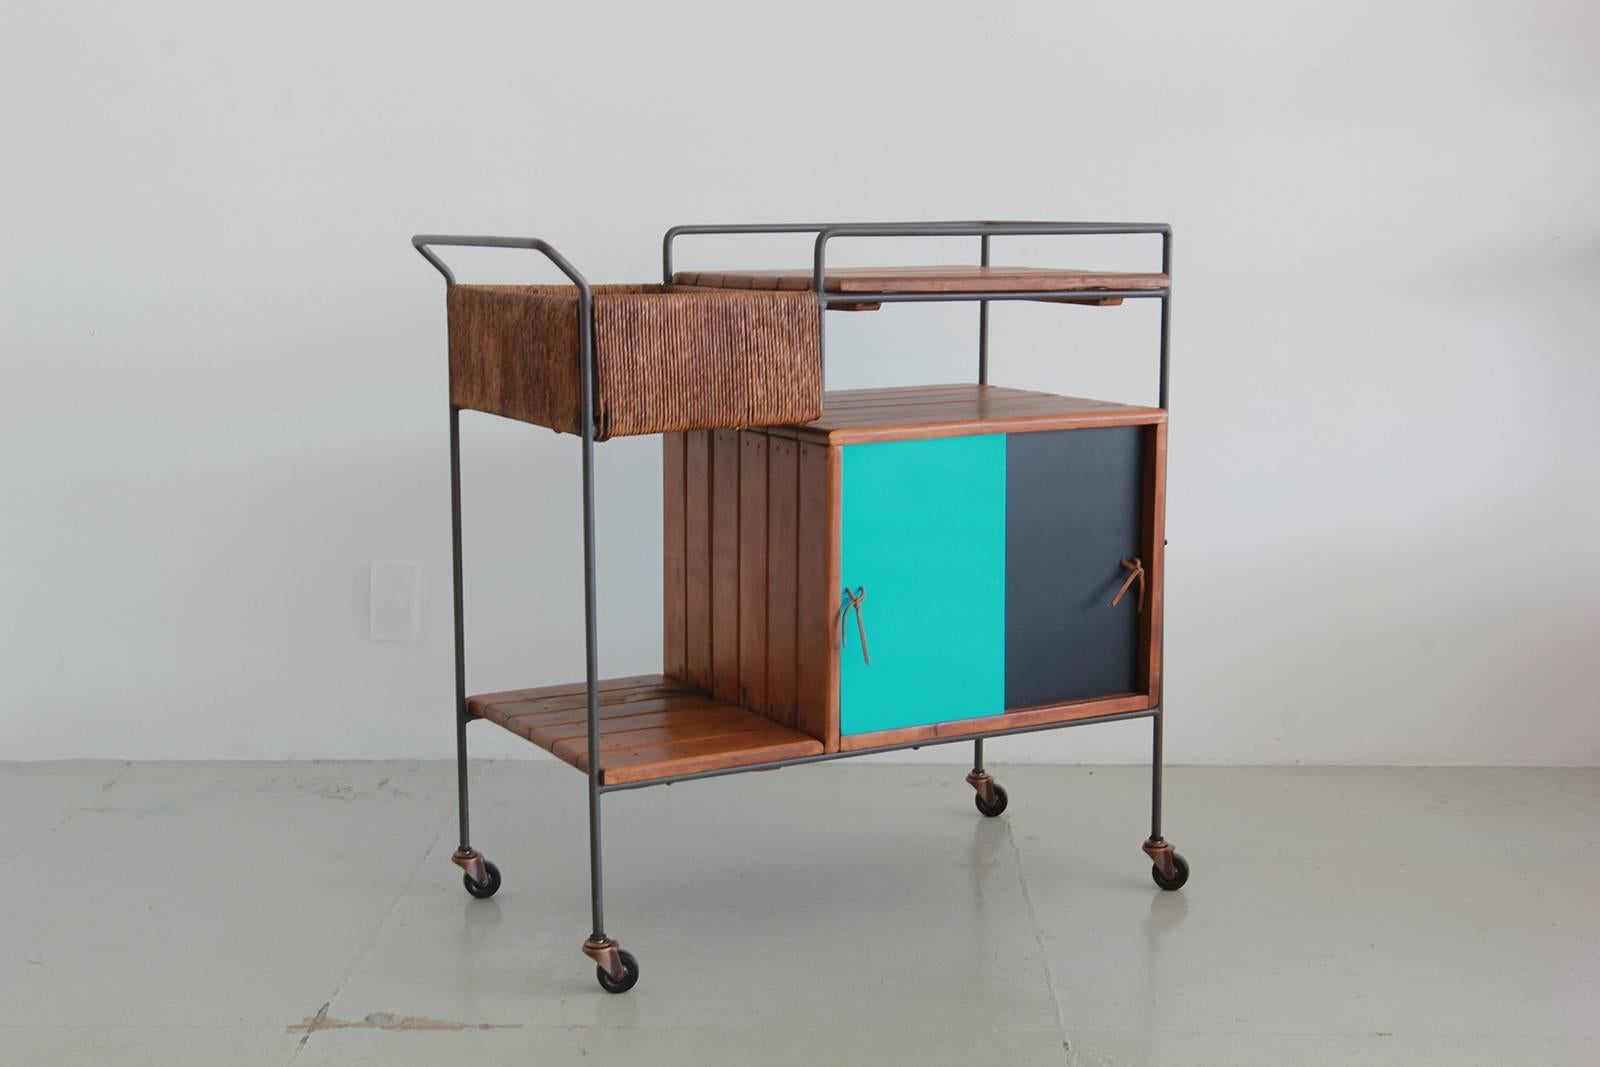 Great bar cart by Arthur Umanoff for Raymor. Black wrought iron frame, wood slat shelving, woven rushed storage compartment and sliding lacquered doors with extra storage.